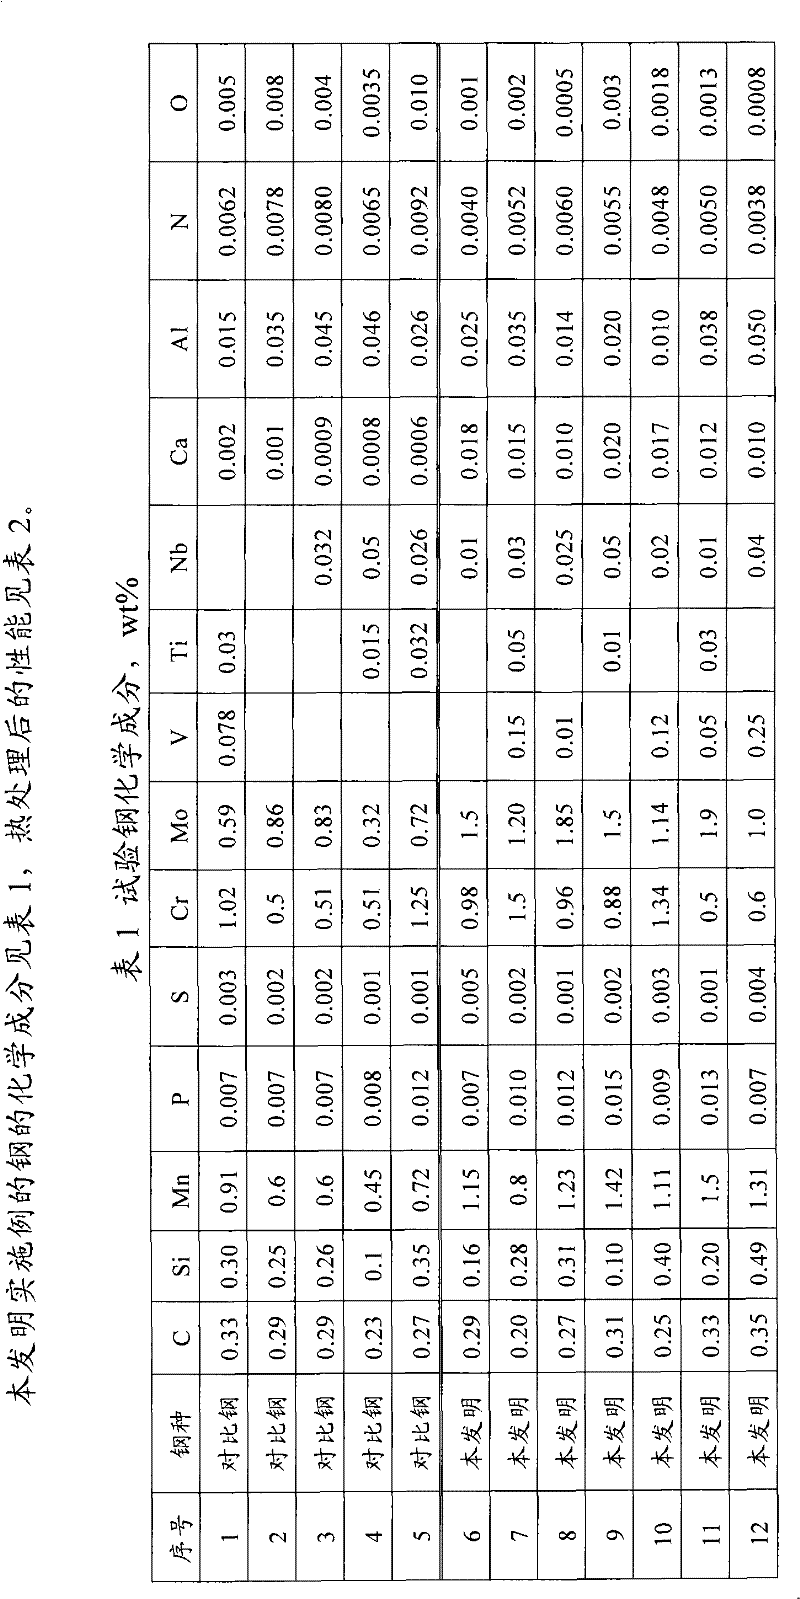 Hydrogen sulfide corrosion-resistant steel for petroleum drill rod and manufacturing method for hydrogen sulfide corrosion-resistant steel